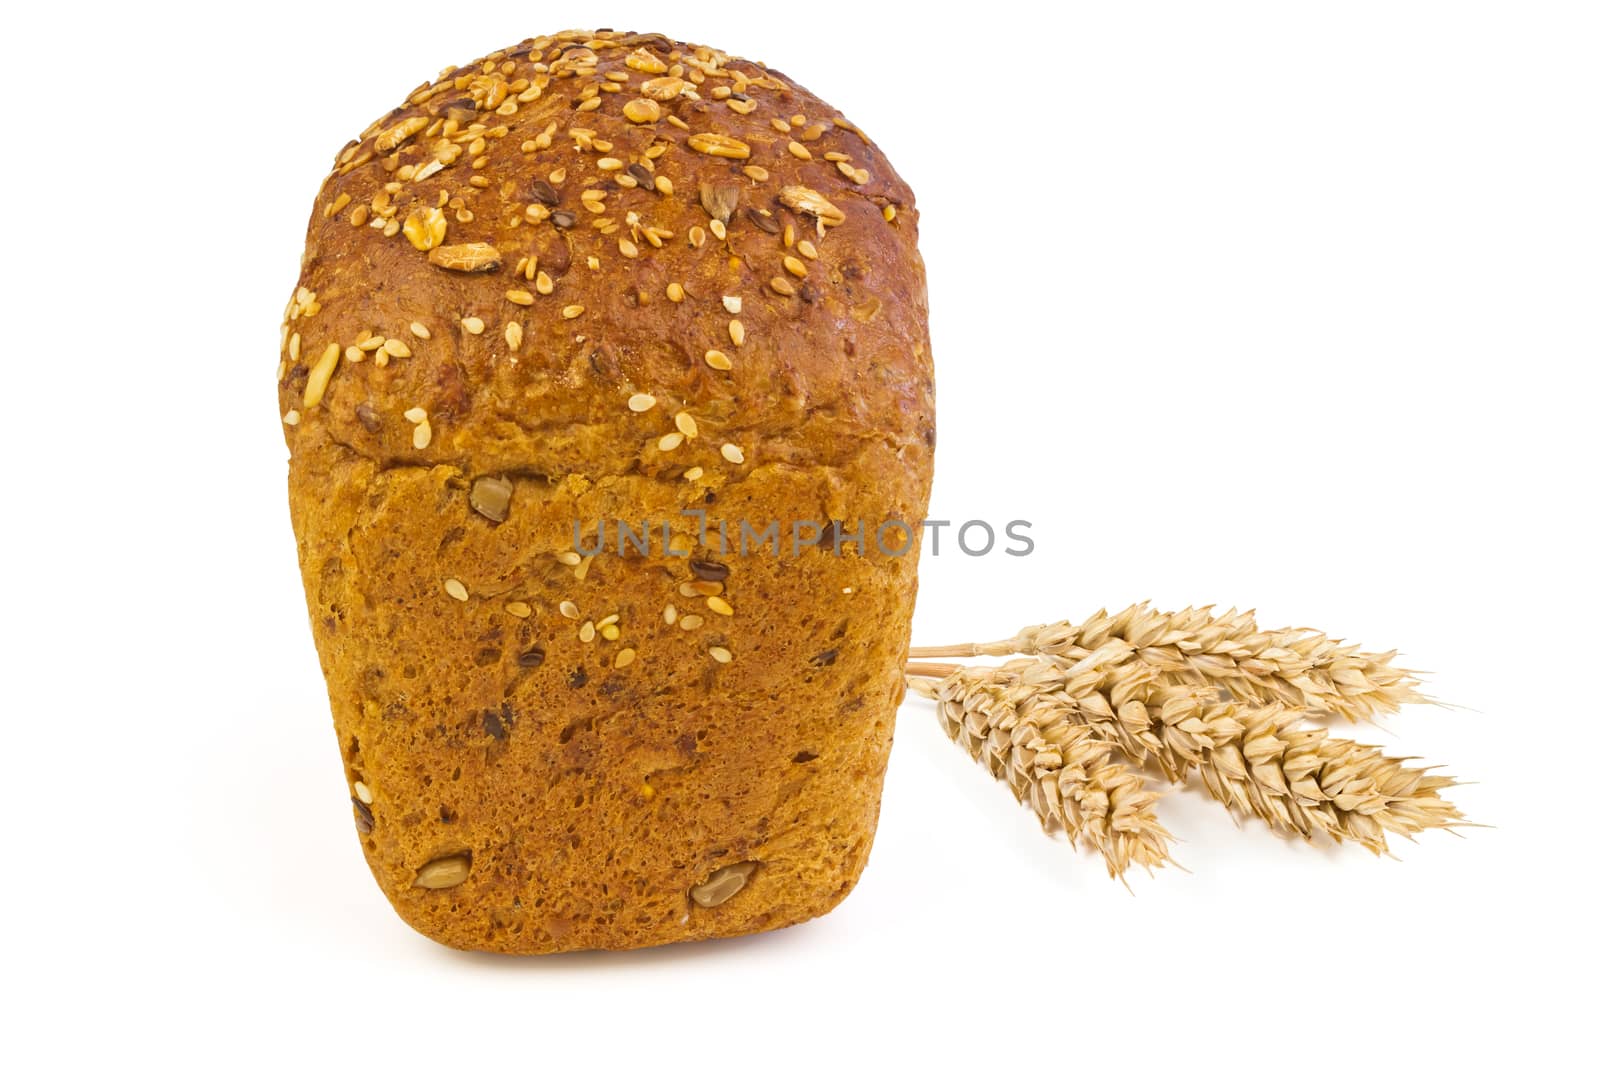 A loaf of bread with sunflower seeds, sesame seeds, grains of wheat and spikelets of wheat on a white background